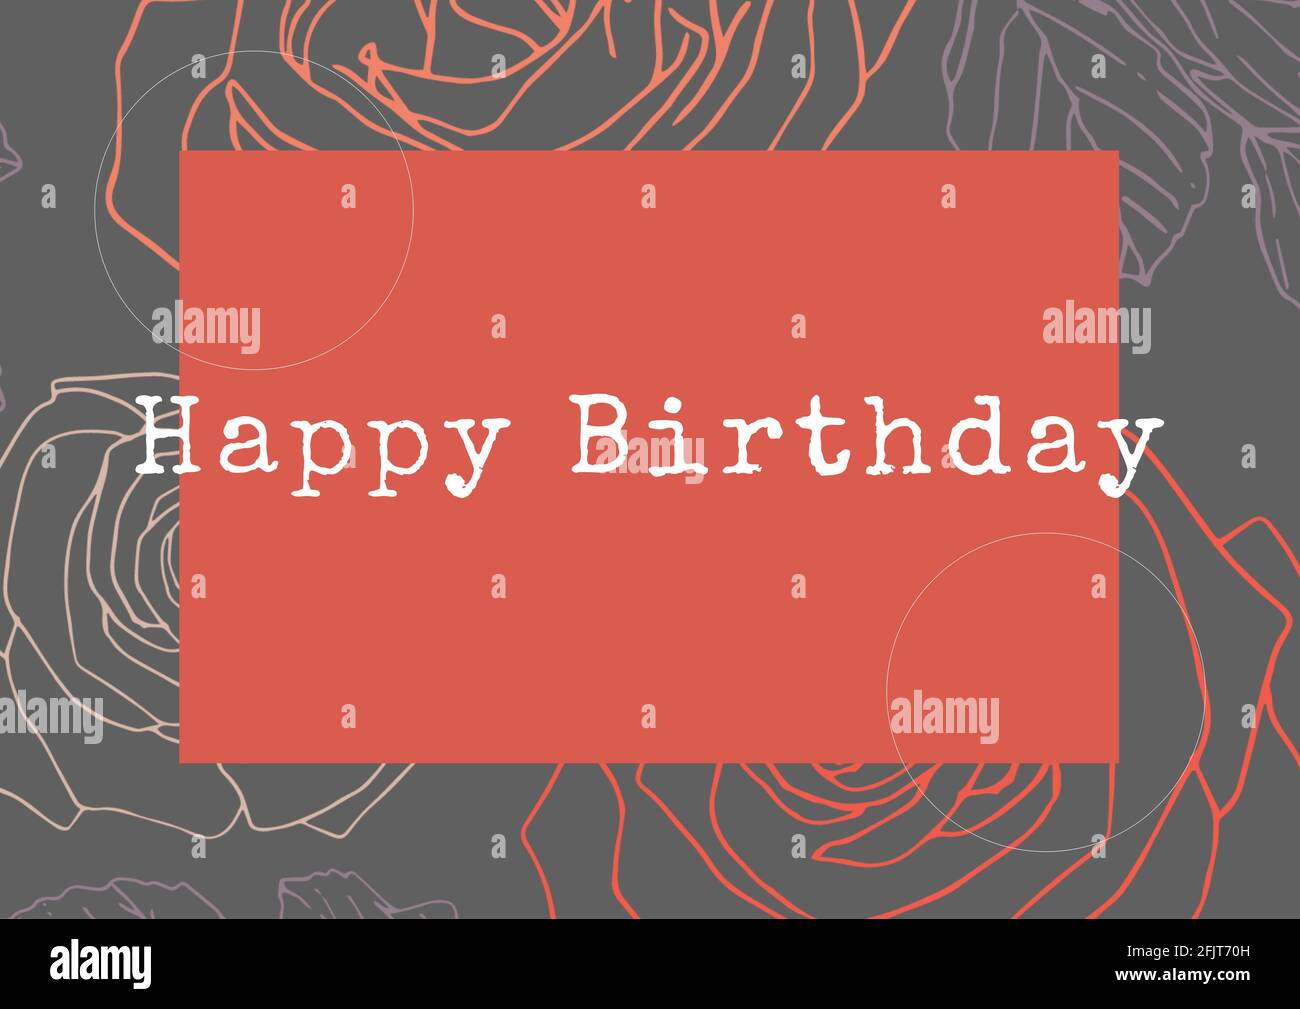 Happy birthday text over red banner against floral design on grey background Stock Photo